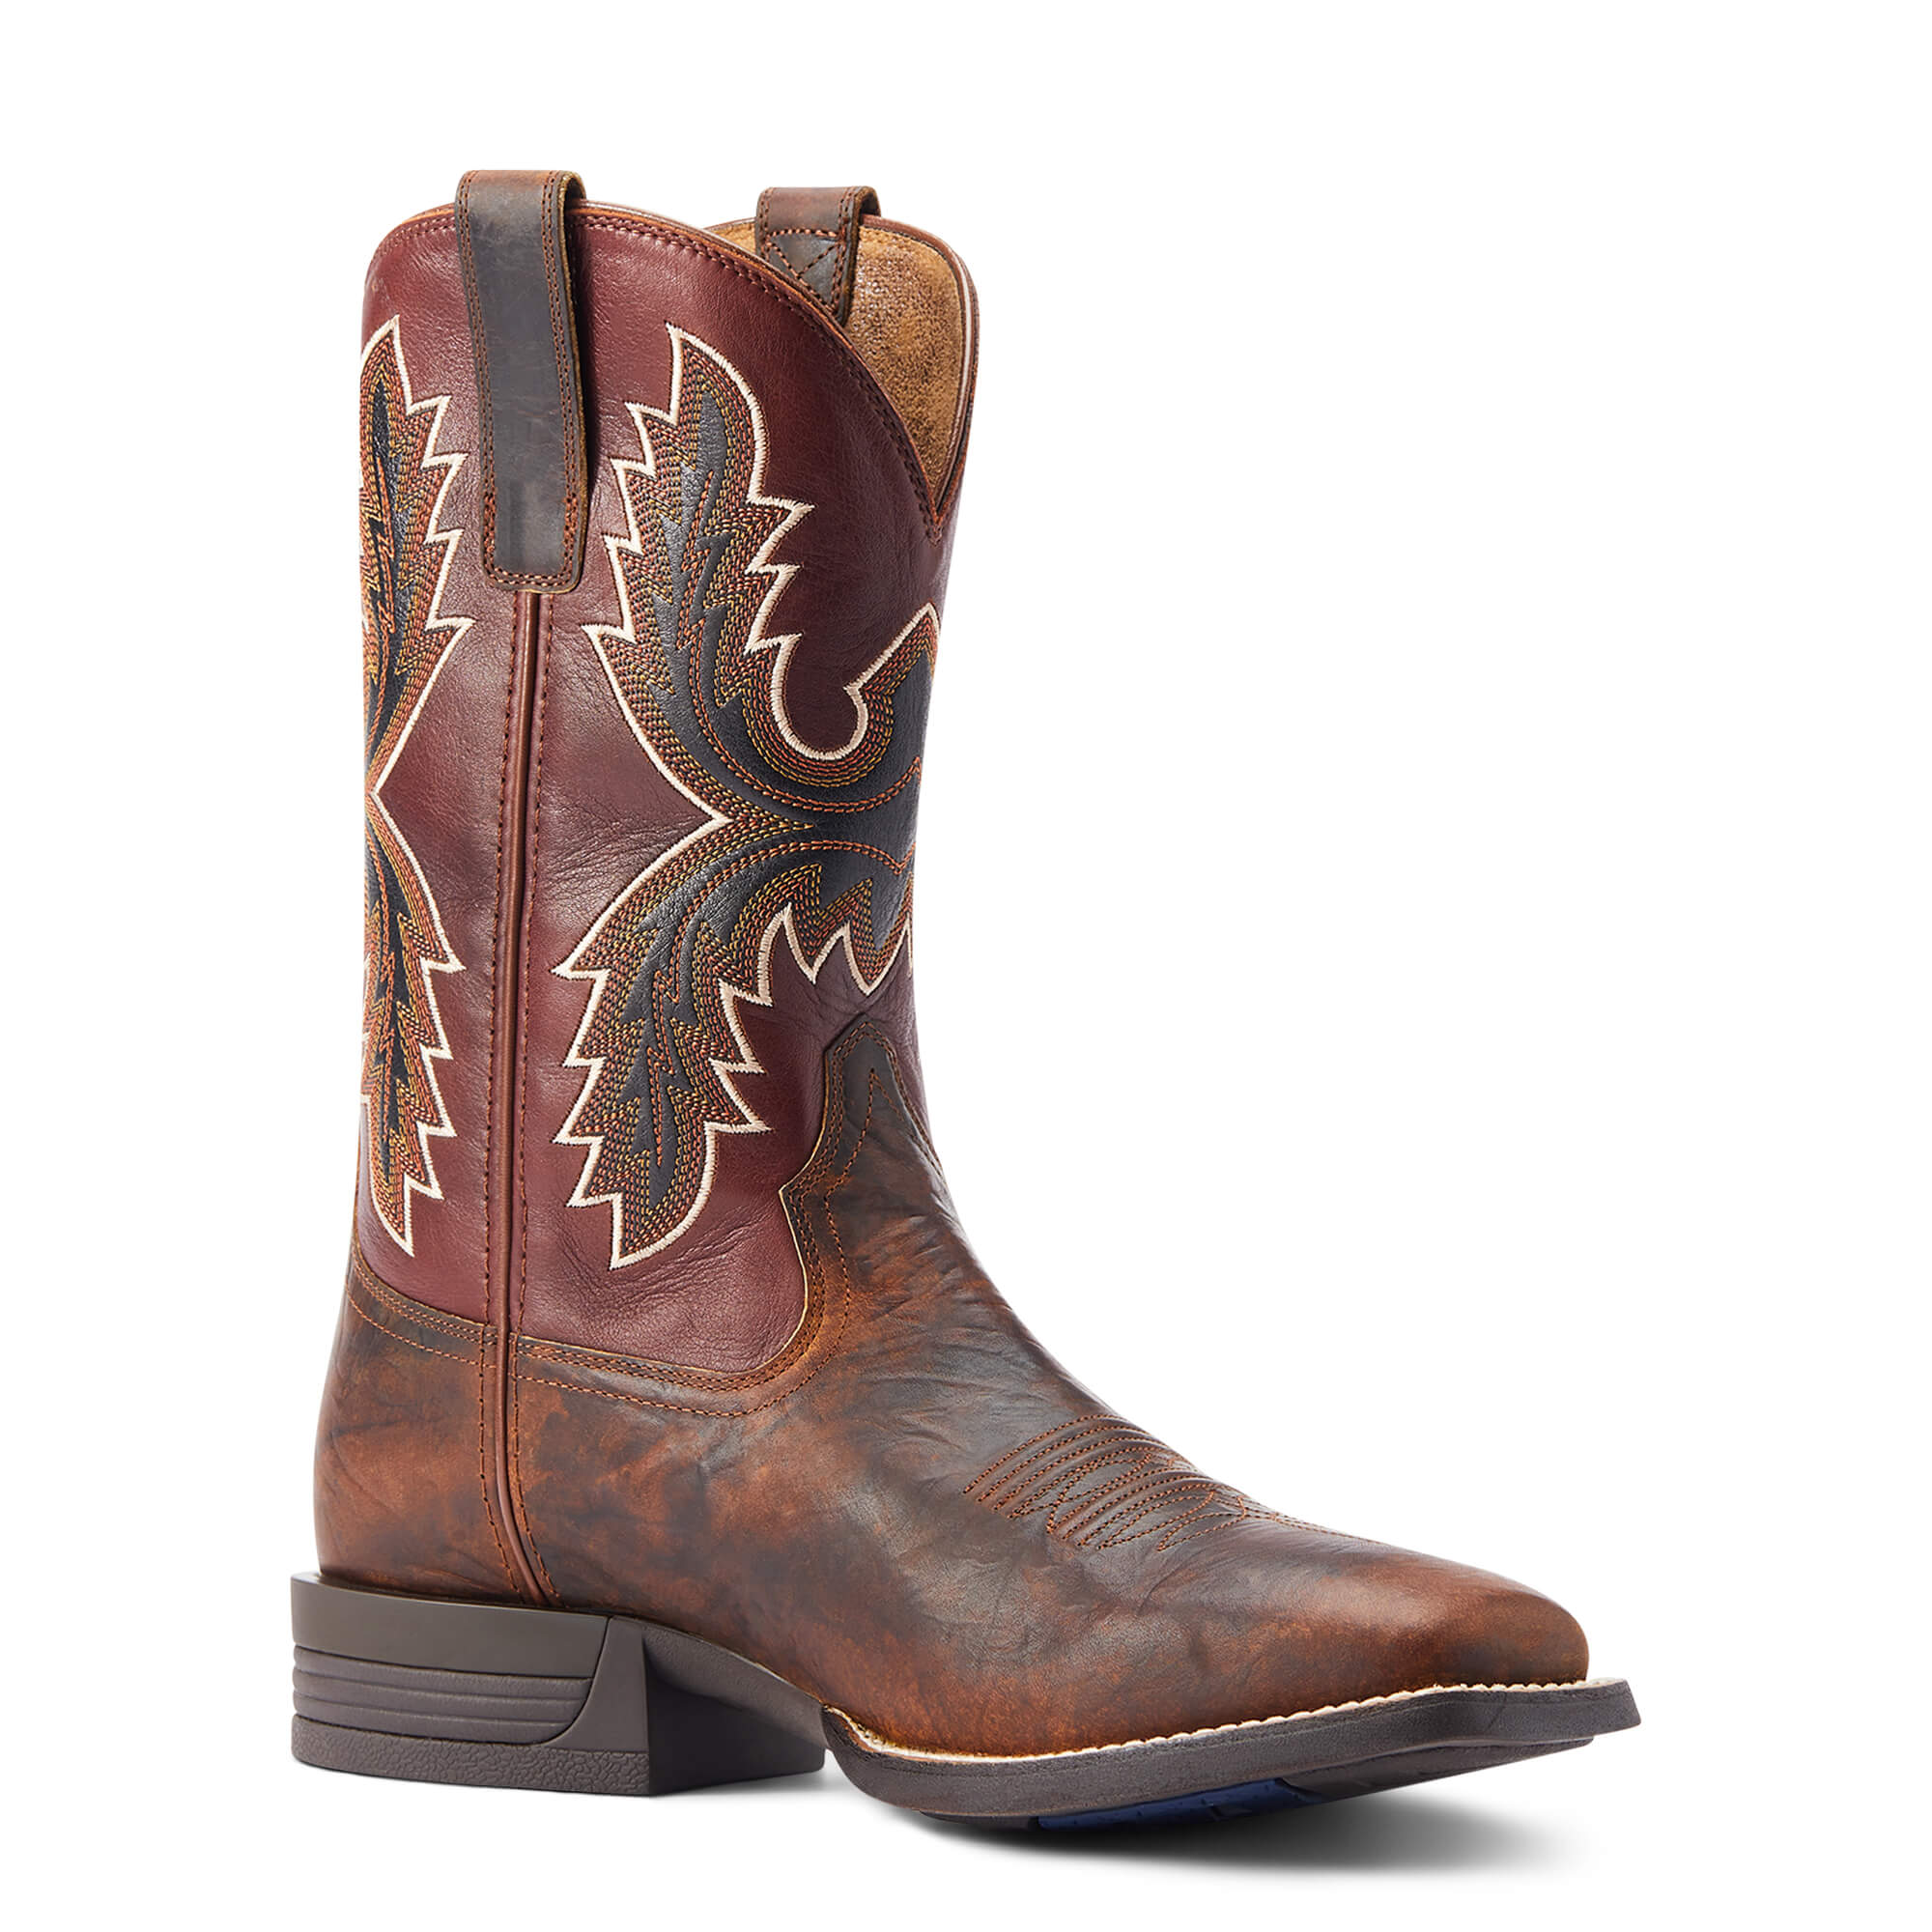 ARIAT - Men's Style # 10044574 Pay Window Western Boot